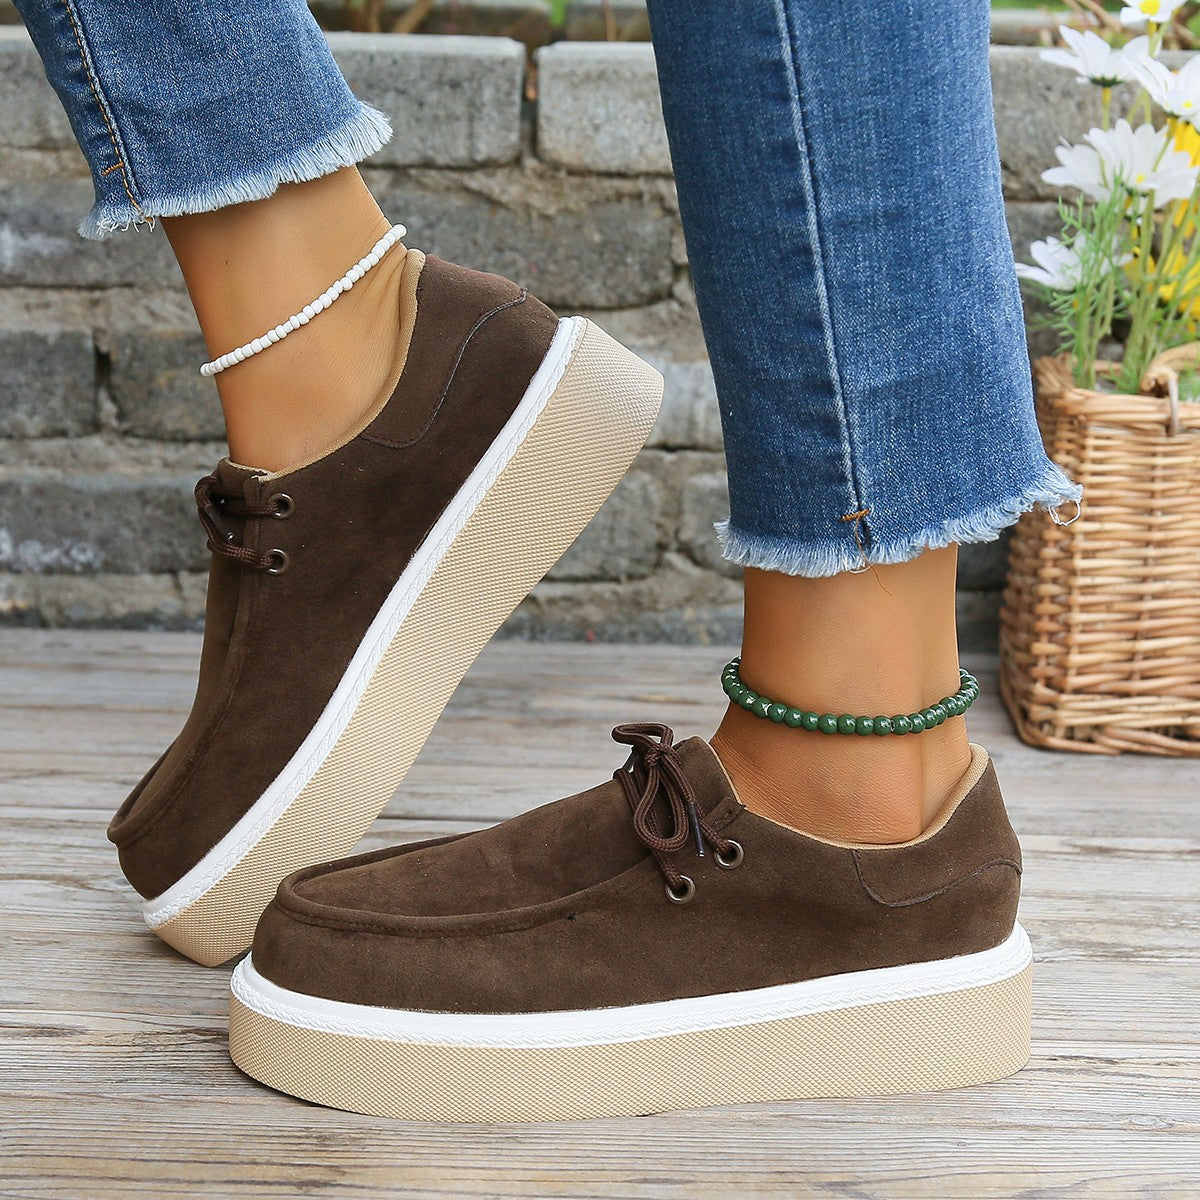 Sneakers  | New Thick Bottom Lace-up Flats Women Solid Color Casual Fashion Lightweight Sneakers | Dark Brown |  Size36| thecurvestory.myshopify.com